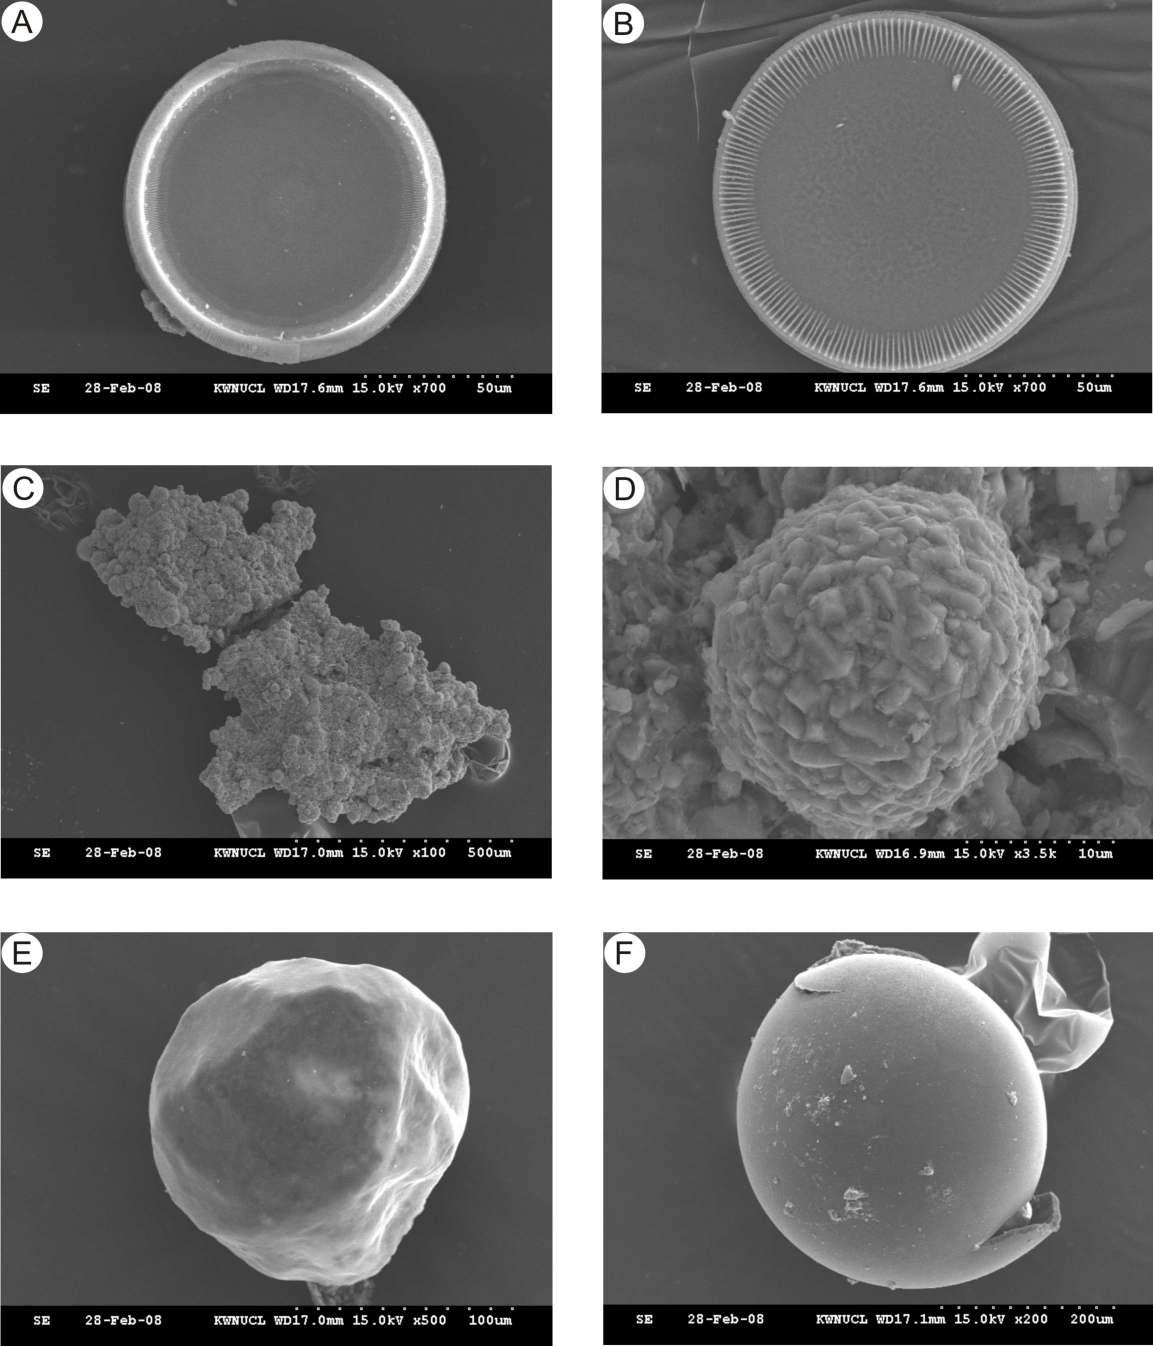 SEM Micrographs showing surface morphology of selected microfossils and sediments in core HS12. A and B: Diatom. C and D: Framboidal Pyrite. E and F: Pollen.